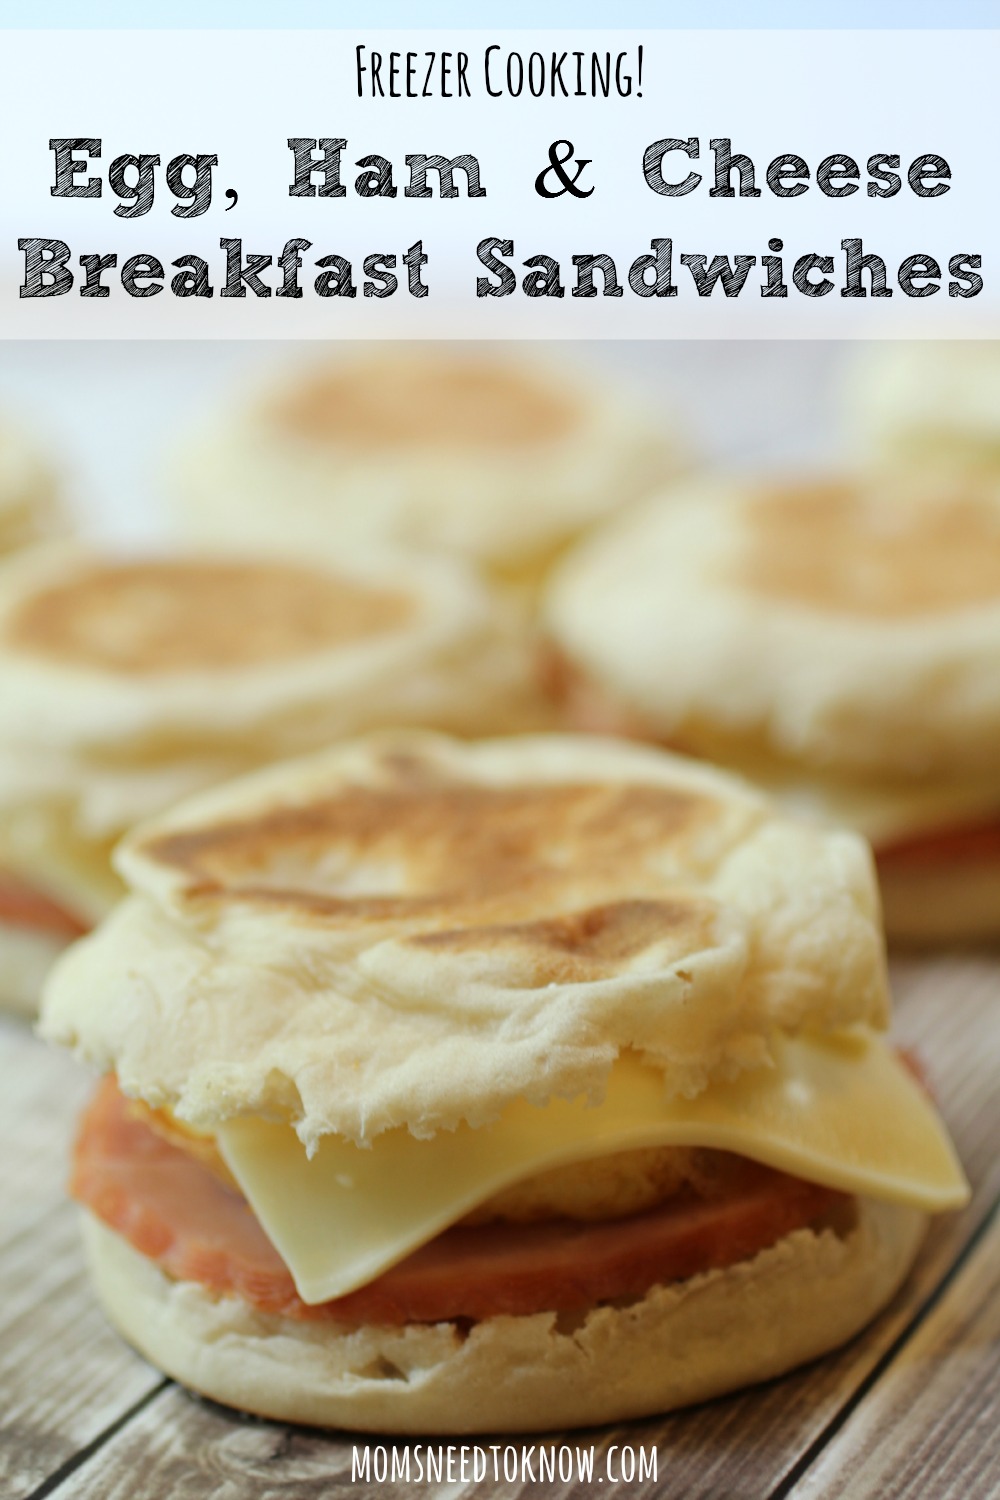 Breakfast Sandwich Freezer Cooking with Egg Ham and Cheese